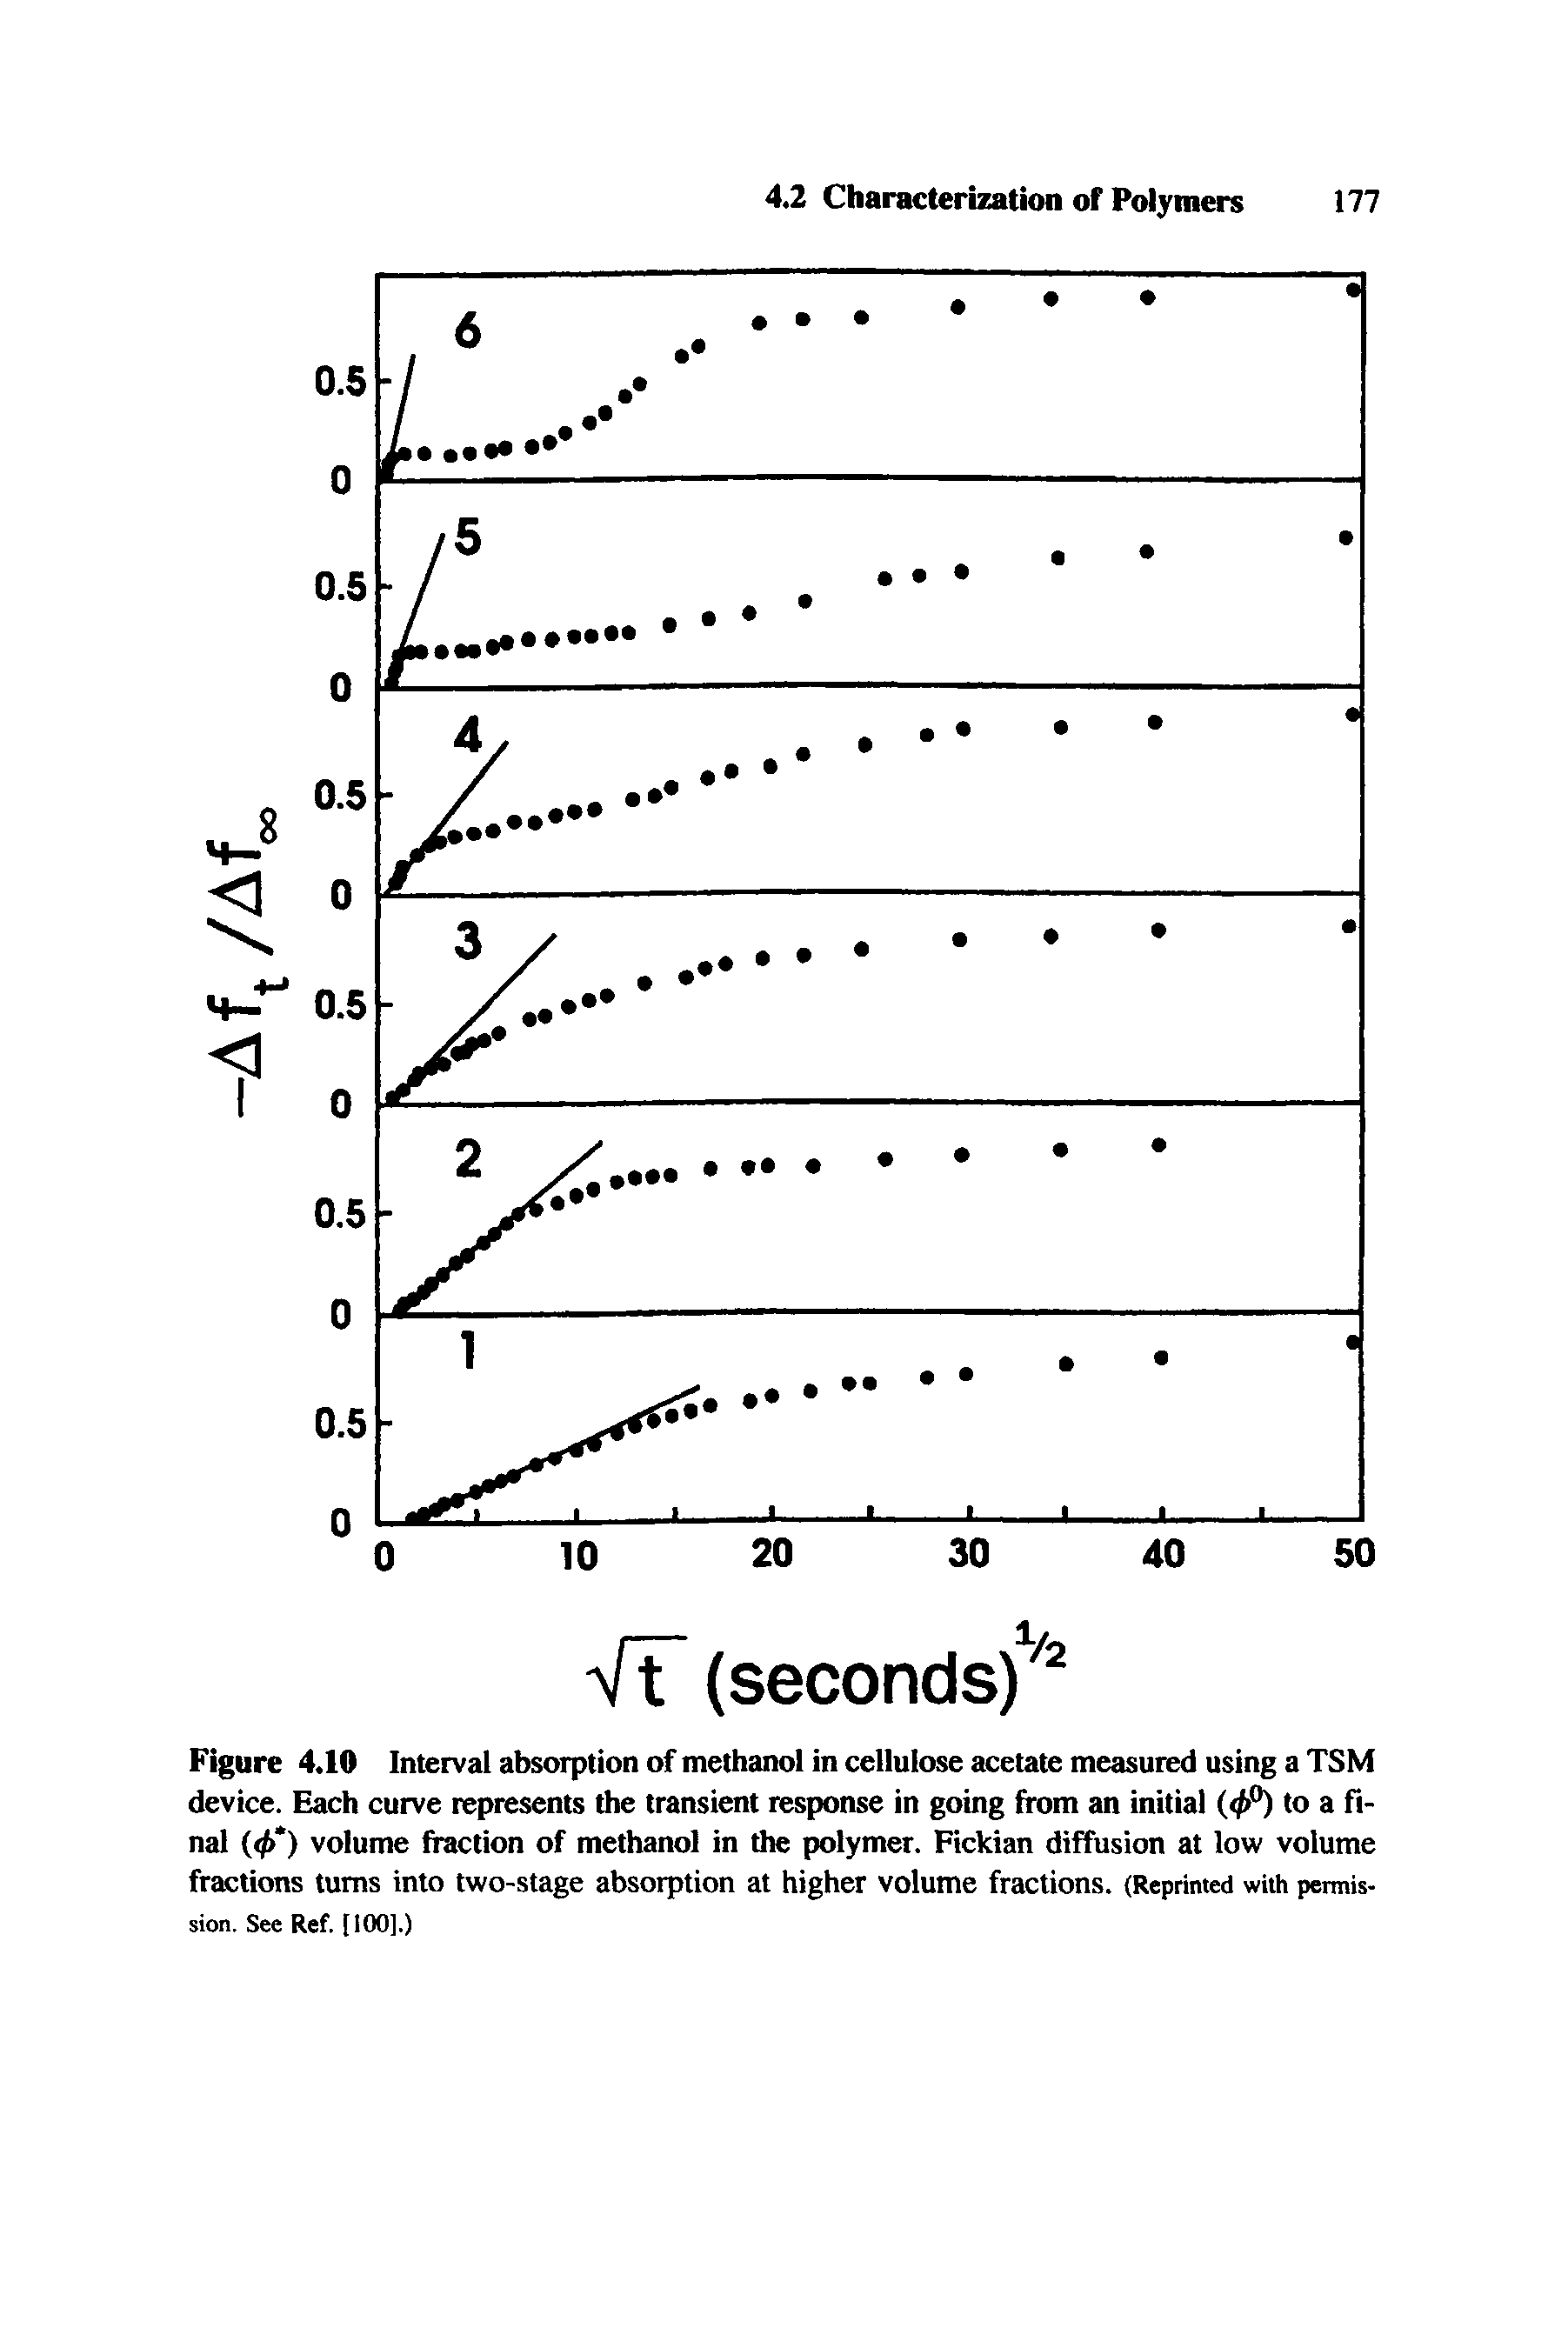 Figure 4.10 Interval absorption of methanol in cellulose acetate measured using a TSM device. Each curve represents the transient response in going from an initial to a final (( ) volume fraction of methanol in the polymer. Fickian diffusion at low volume fractions turns into two-stage absorption at higher volume fractions. (Reprinted with permis-sion. See Ref. [100].)...